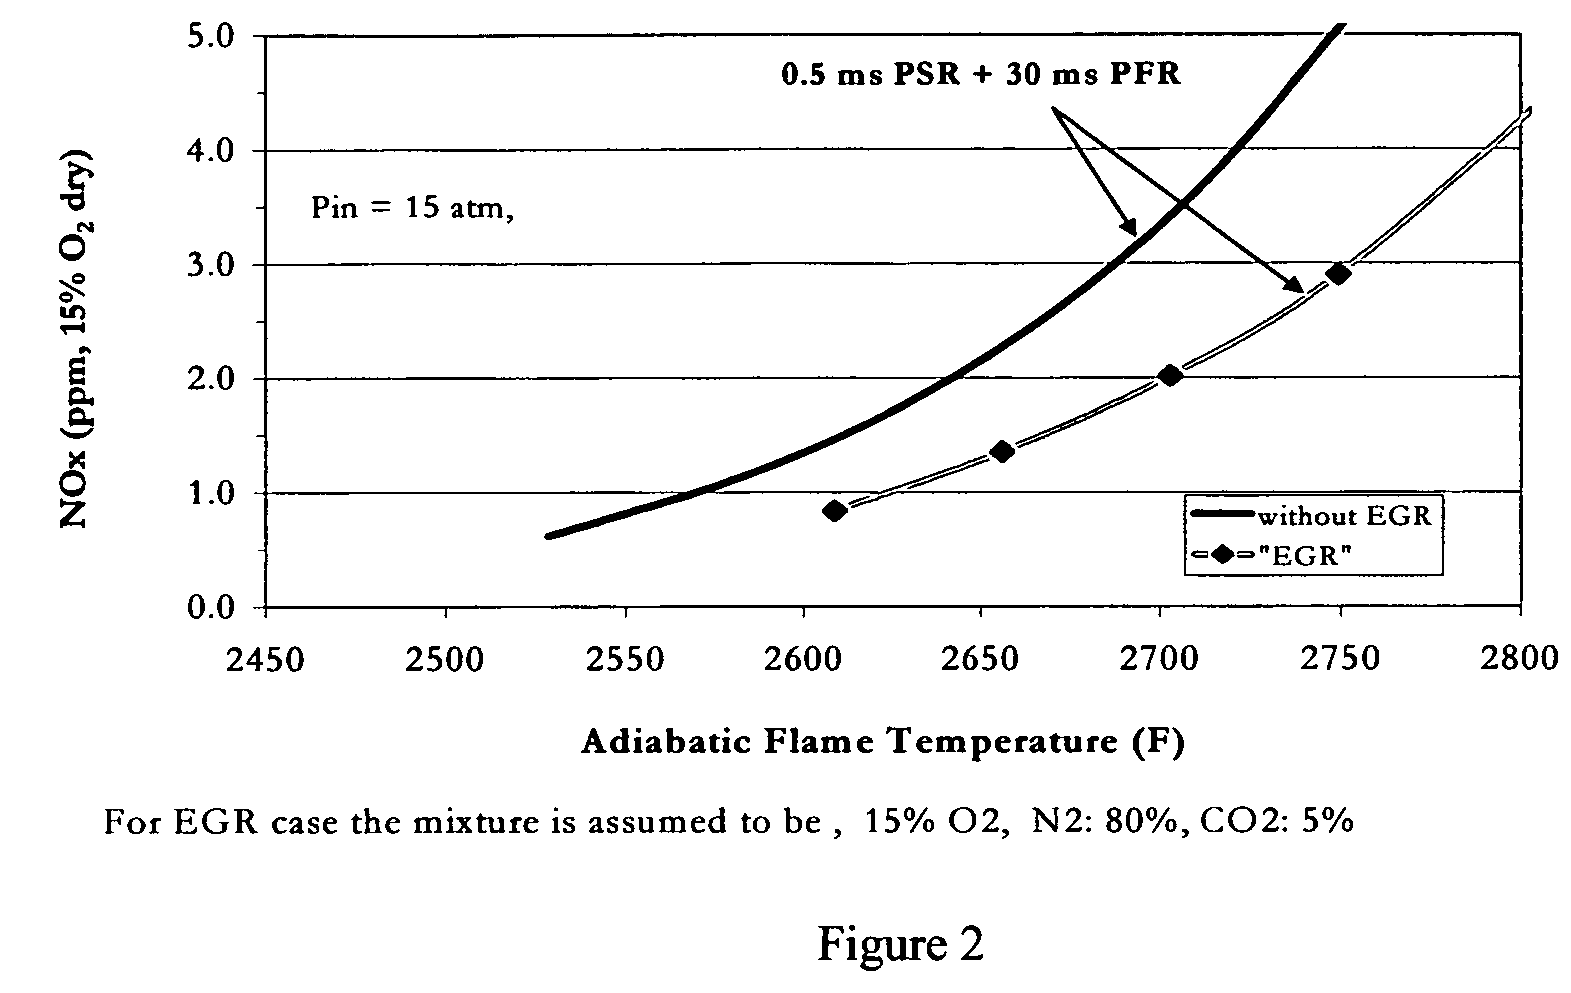 Method for obtaining ultra-low NOx emissions from gas turbines operating at high turbine inlet temperatures